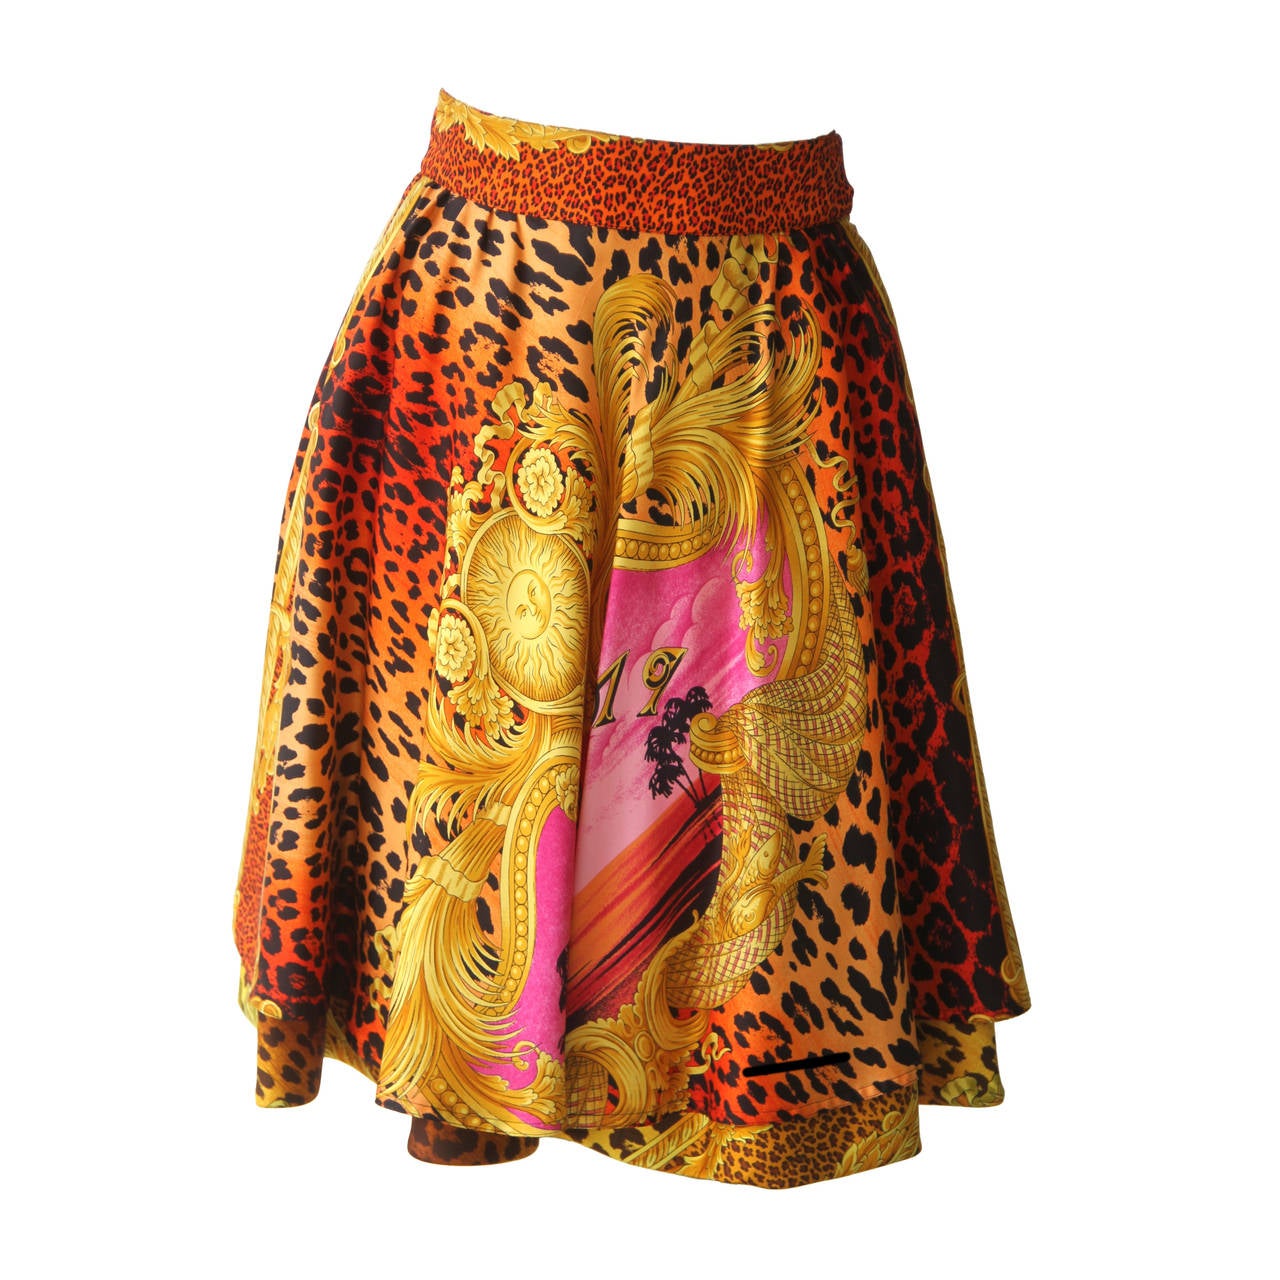 Iconic Gianni Versace Couture Miami Silk Tiered Skirt Spring 1993 For Sale